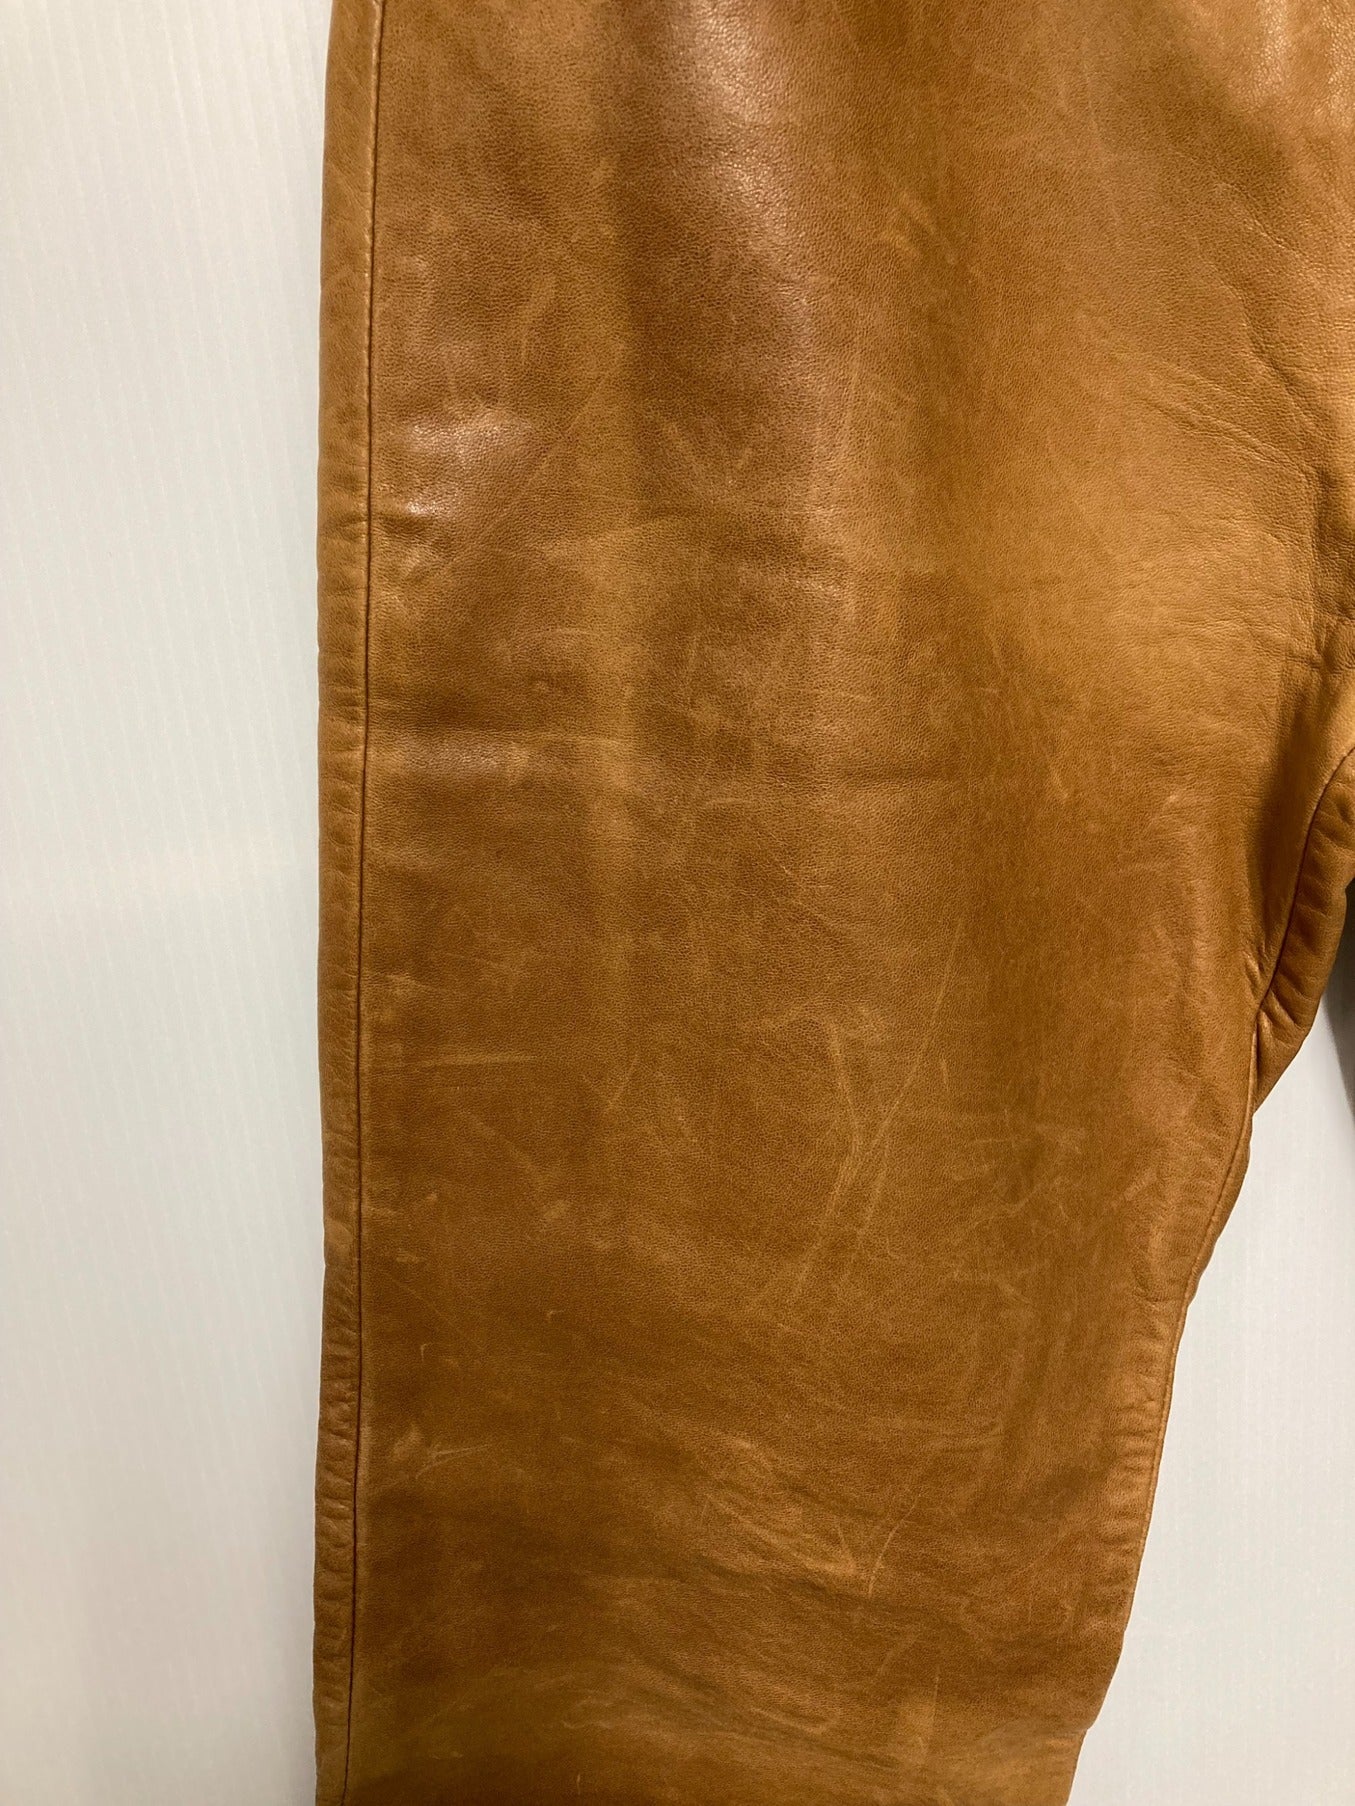 [Pre-owned] DIRK BIKKEMBERGS leather pants